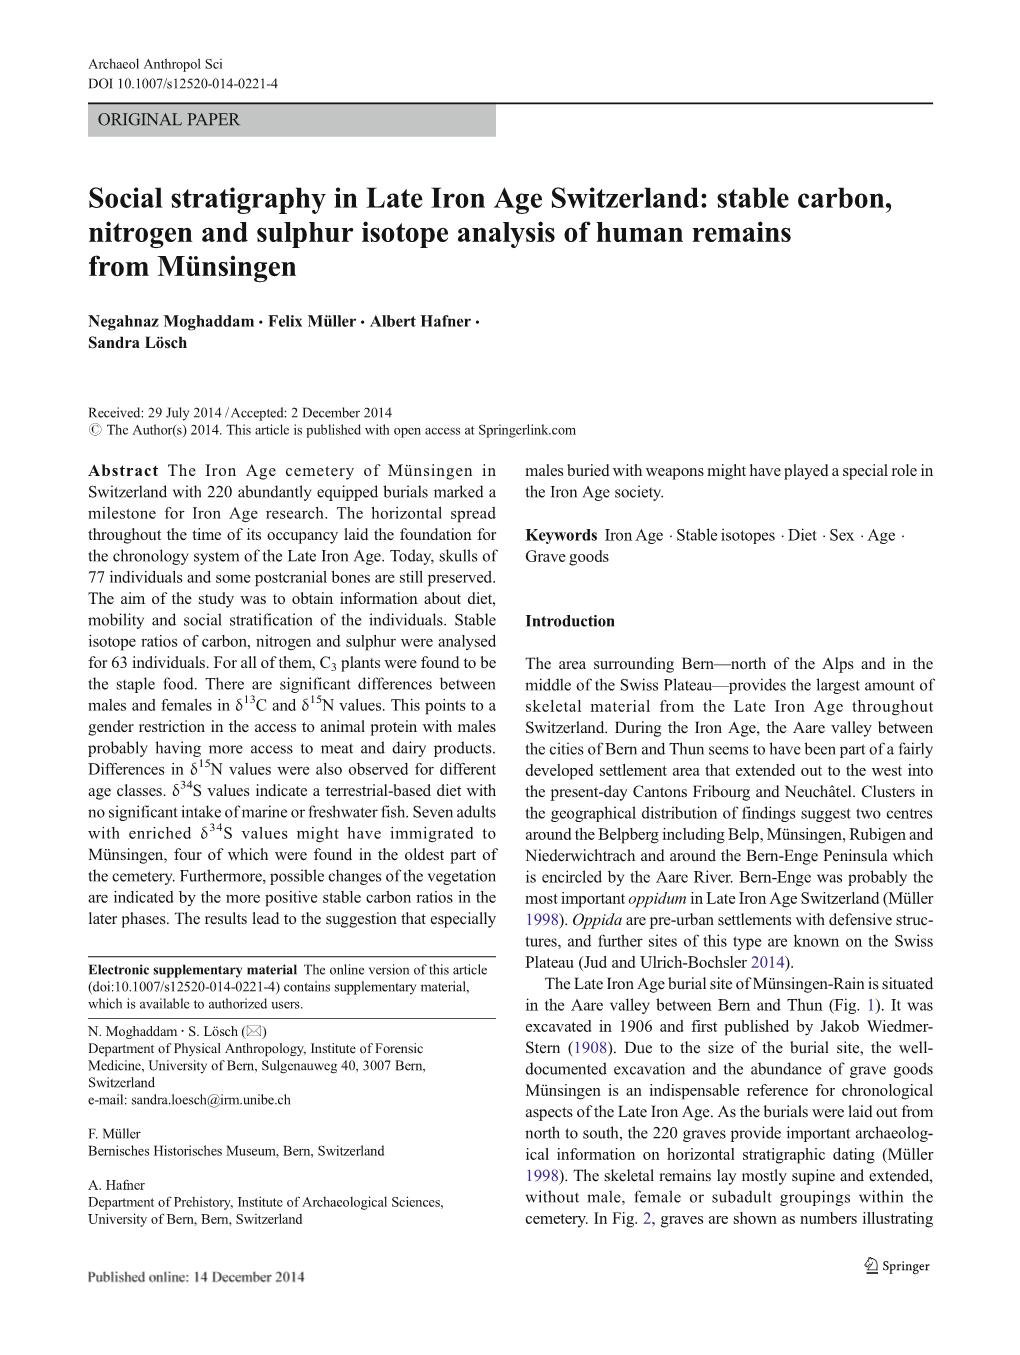 Social Stratigraphy in Late Iron Age Switzerland: Stable Carbon, Nitrogen and Sulphur Isotope Analysis of Human Remains from Münsingen